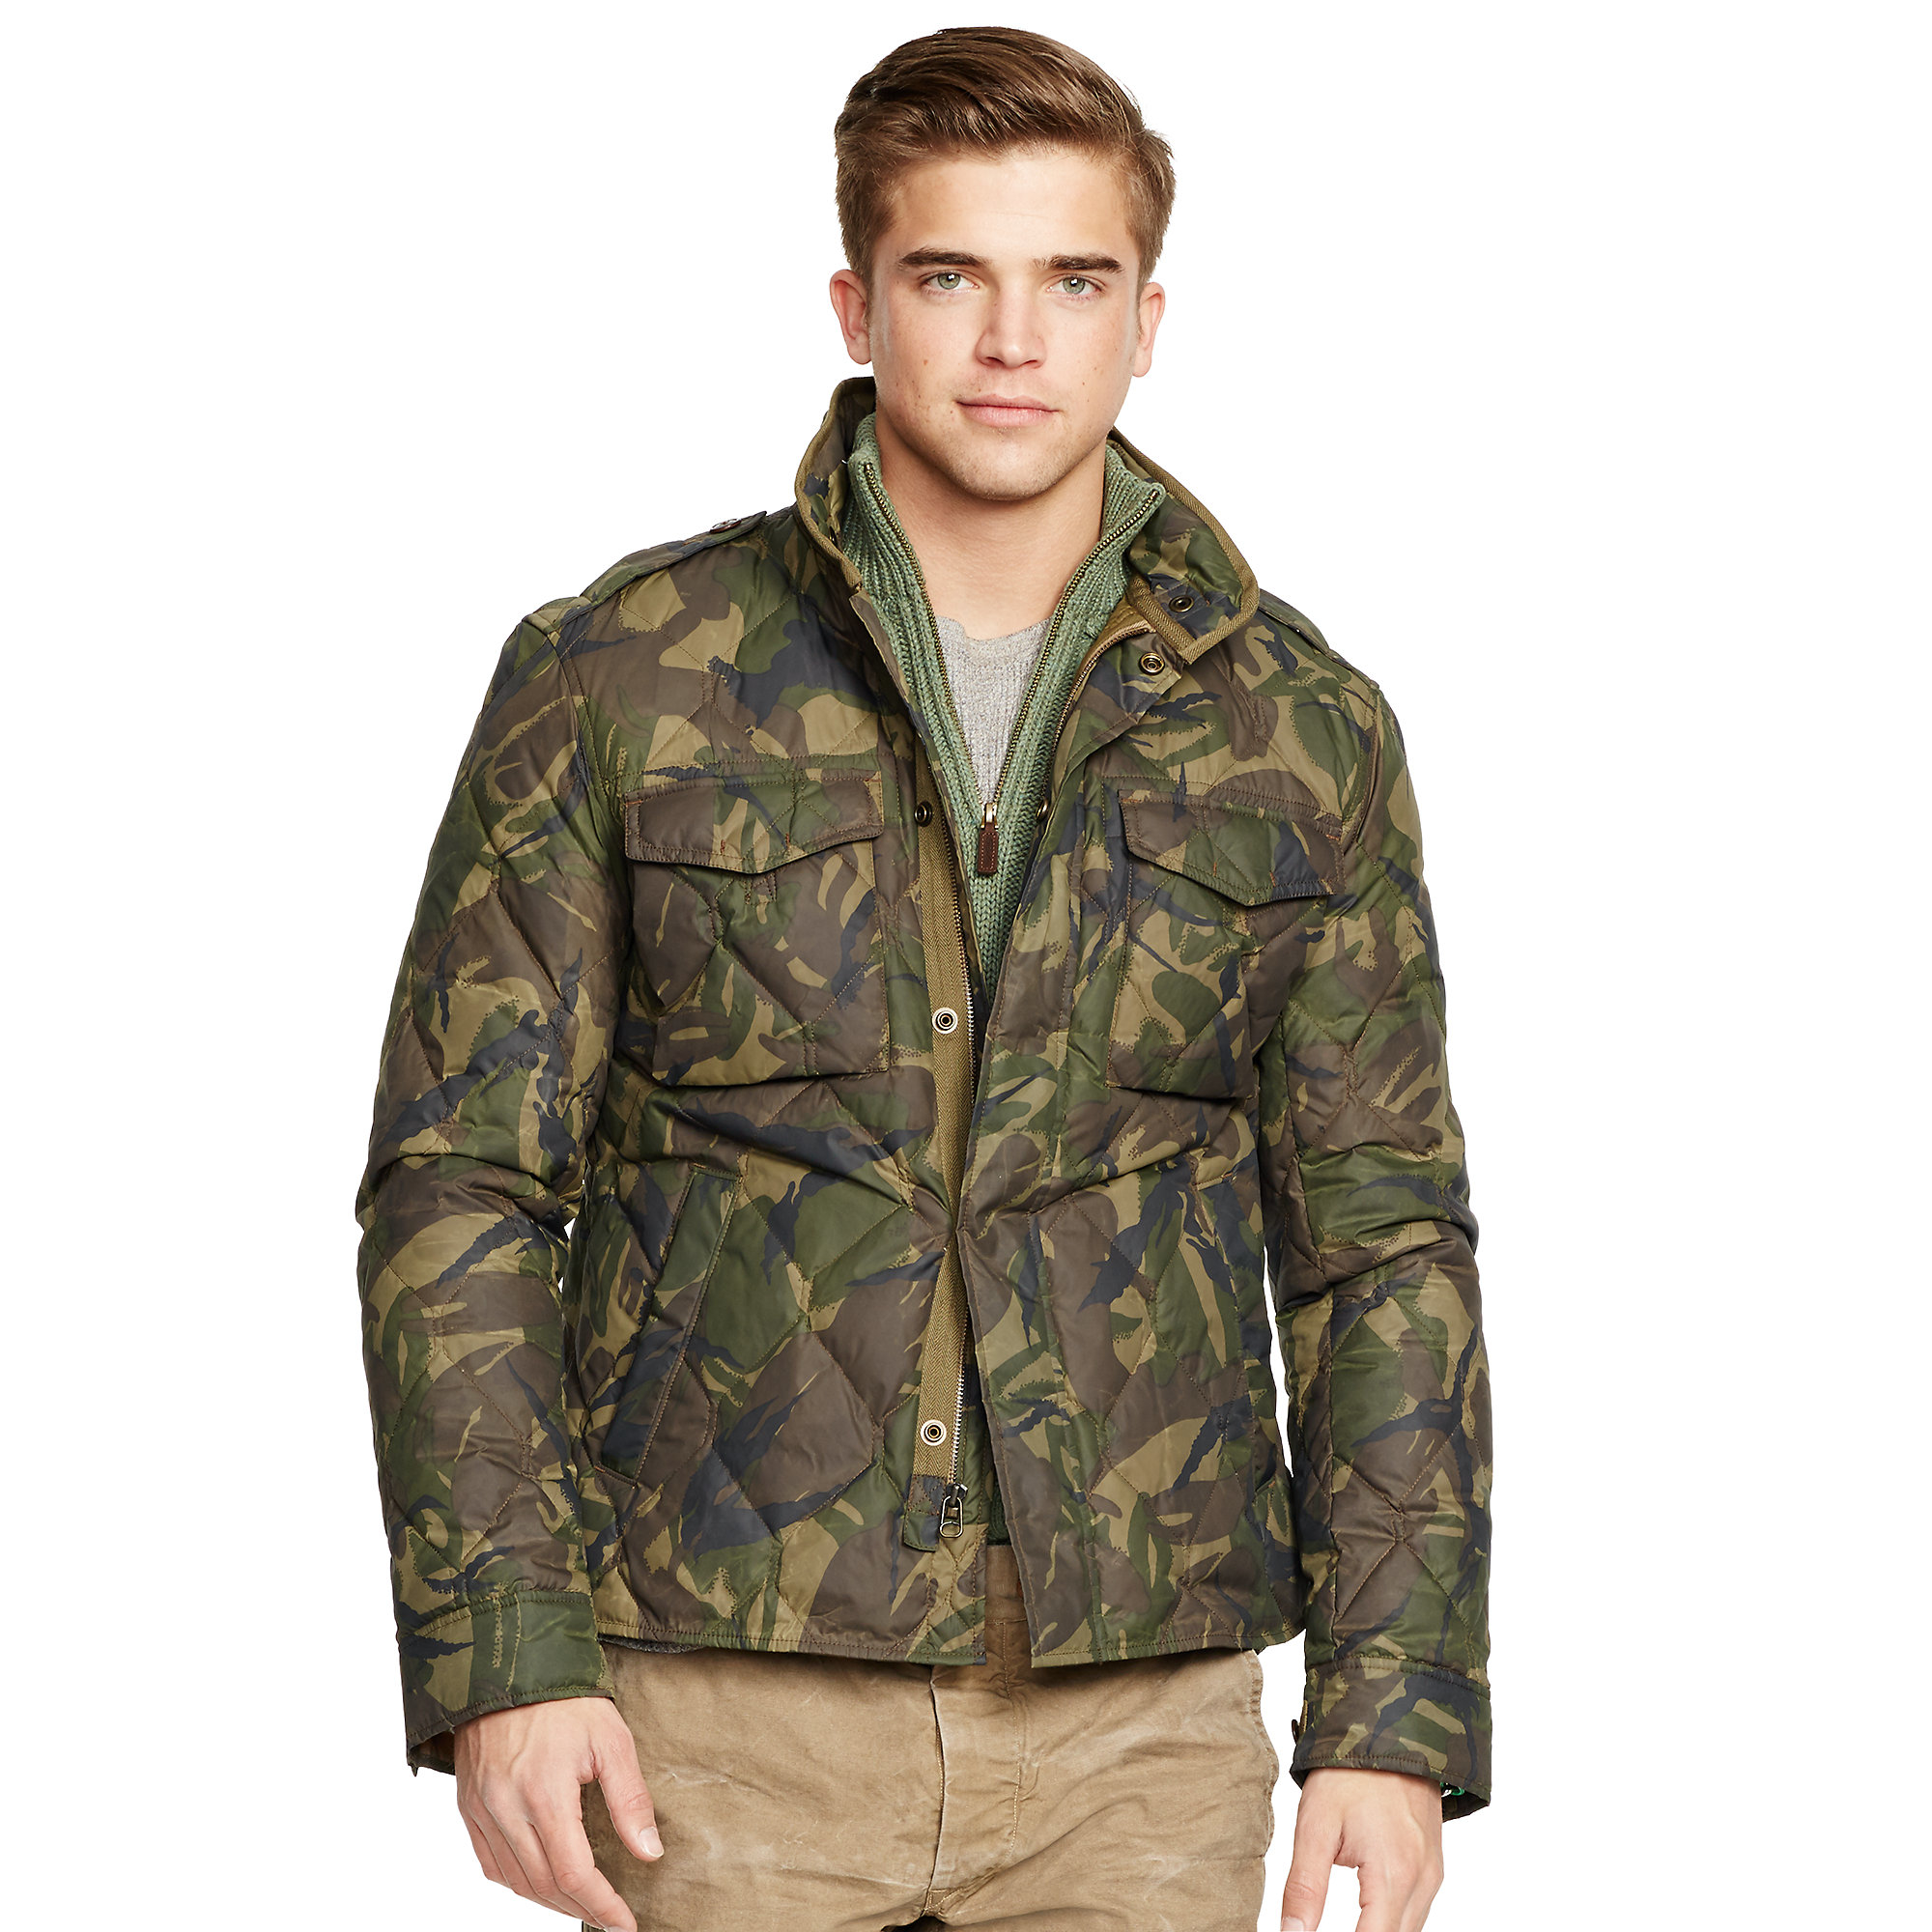 Lyst - Polo Ralph Lauren Quilted Camouflage Down Jacket in Green for Men